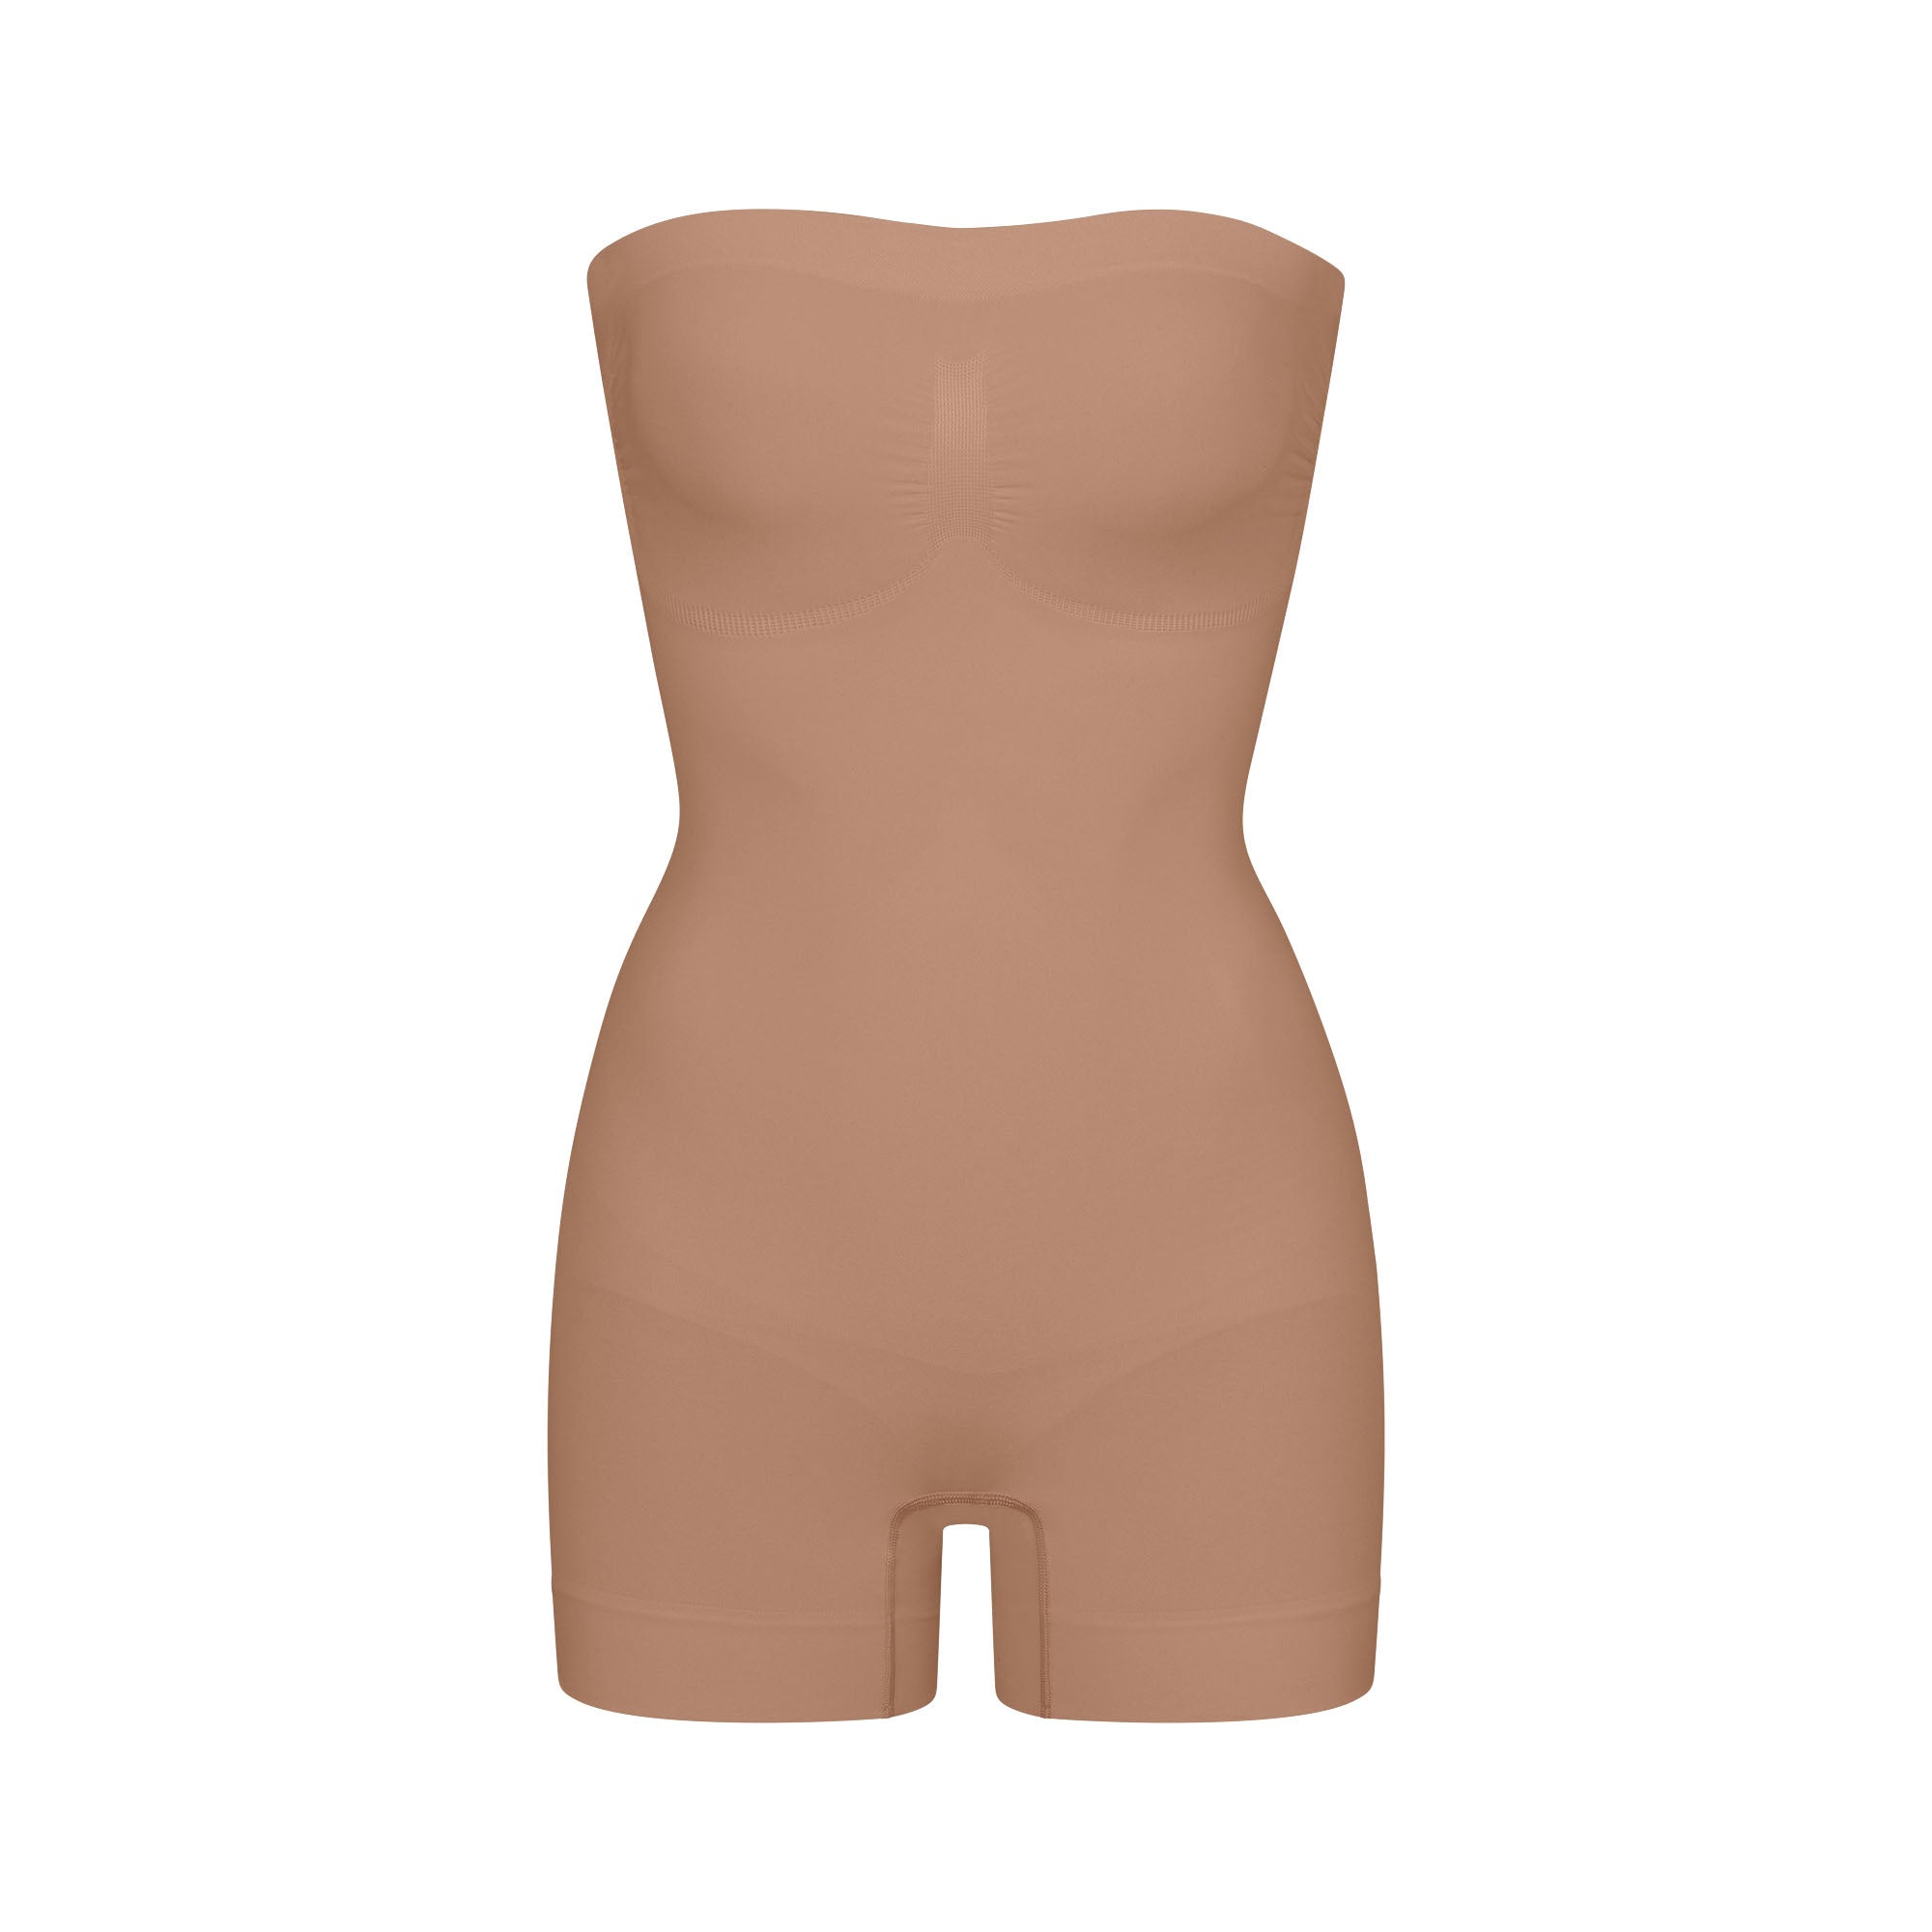 Pumiey Bodysuit Brown Size XS - $20 New With Tags - From Adrianne